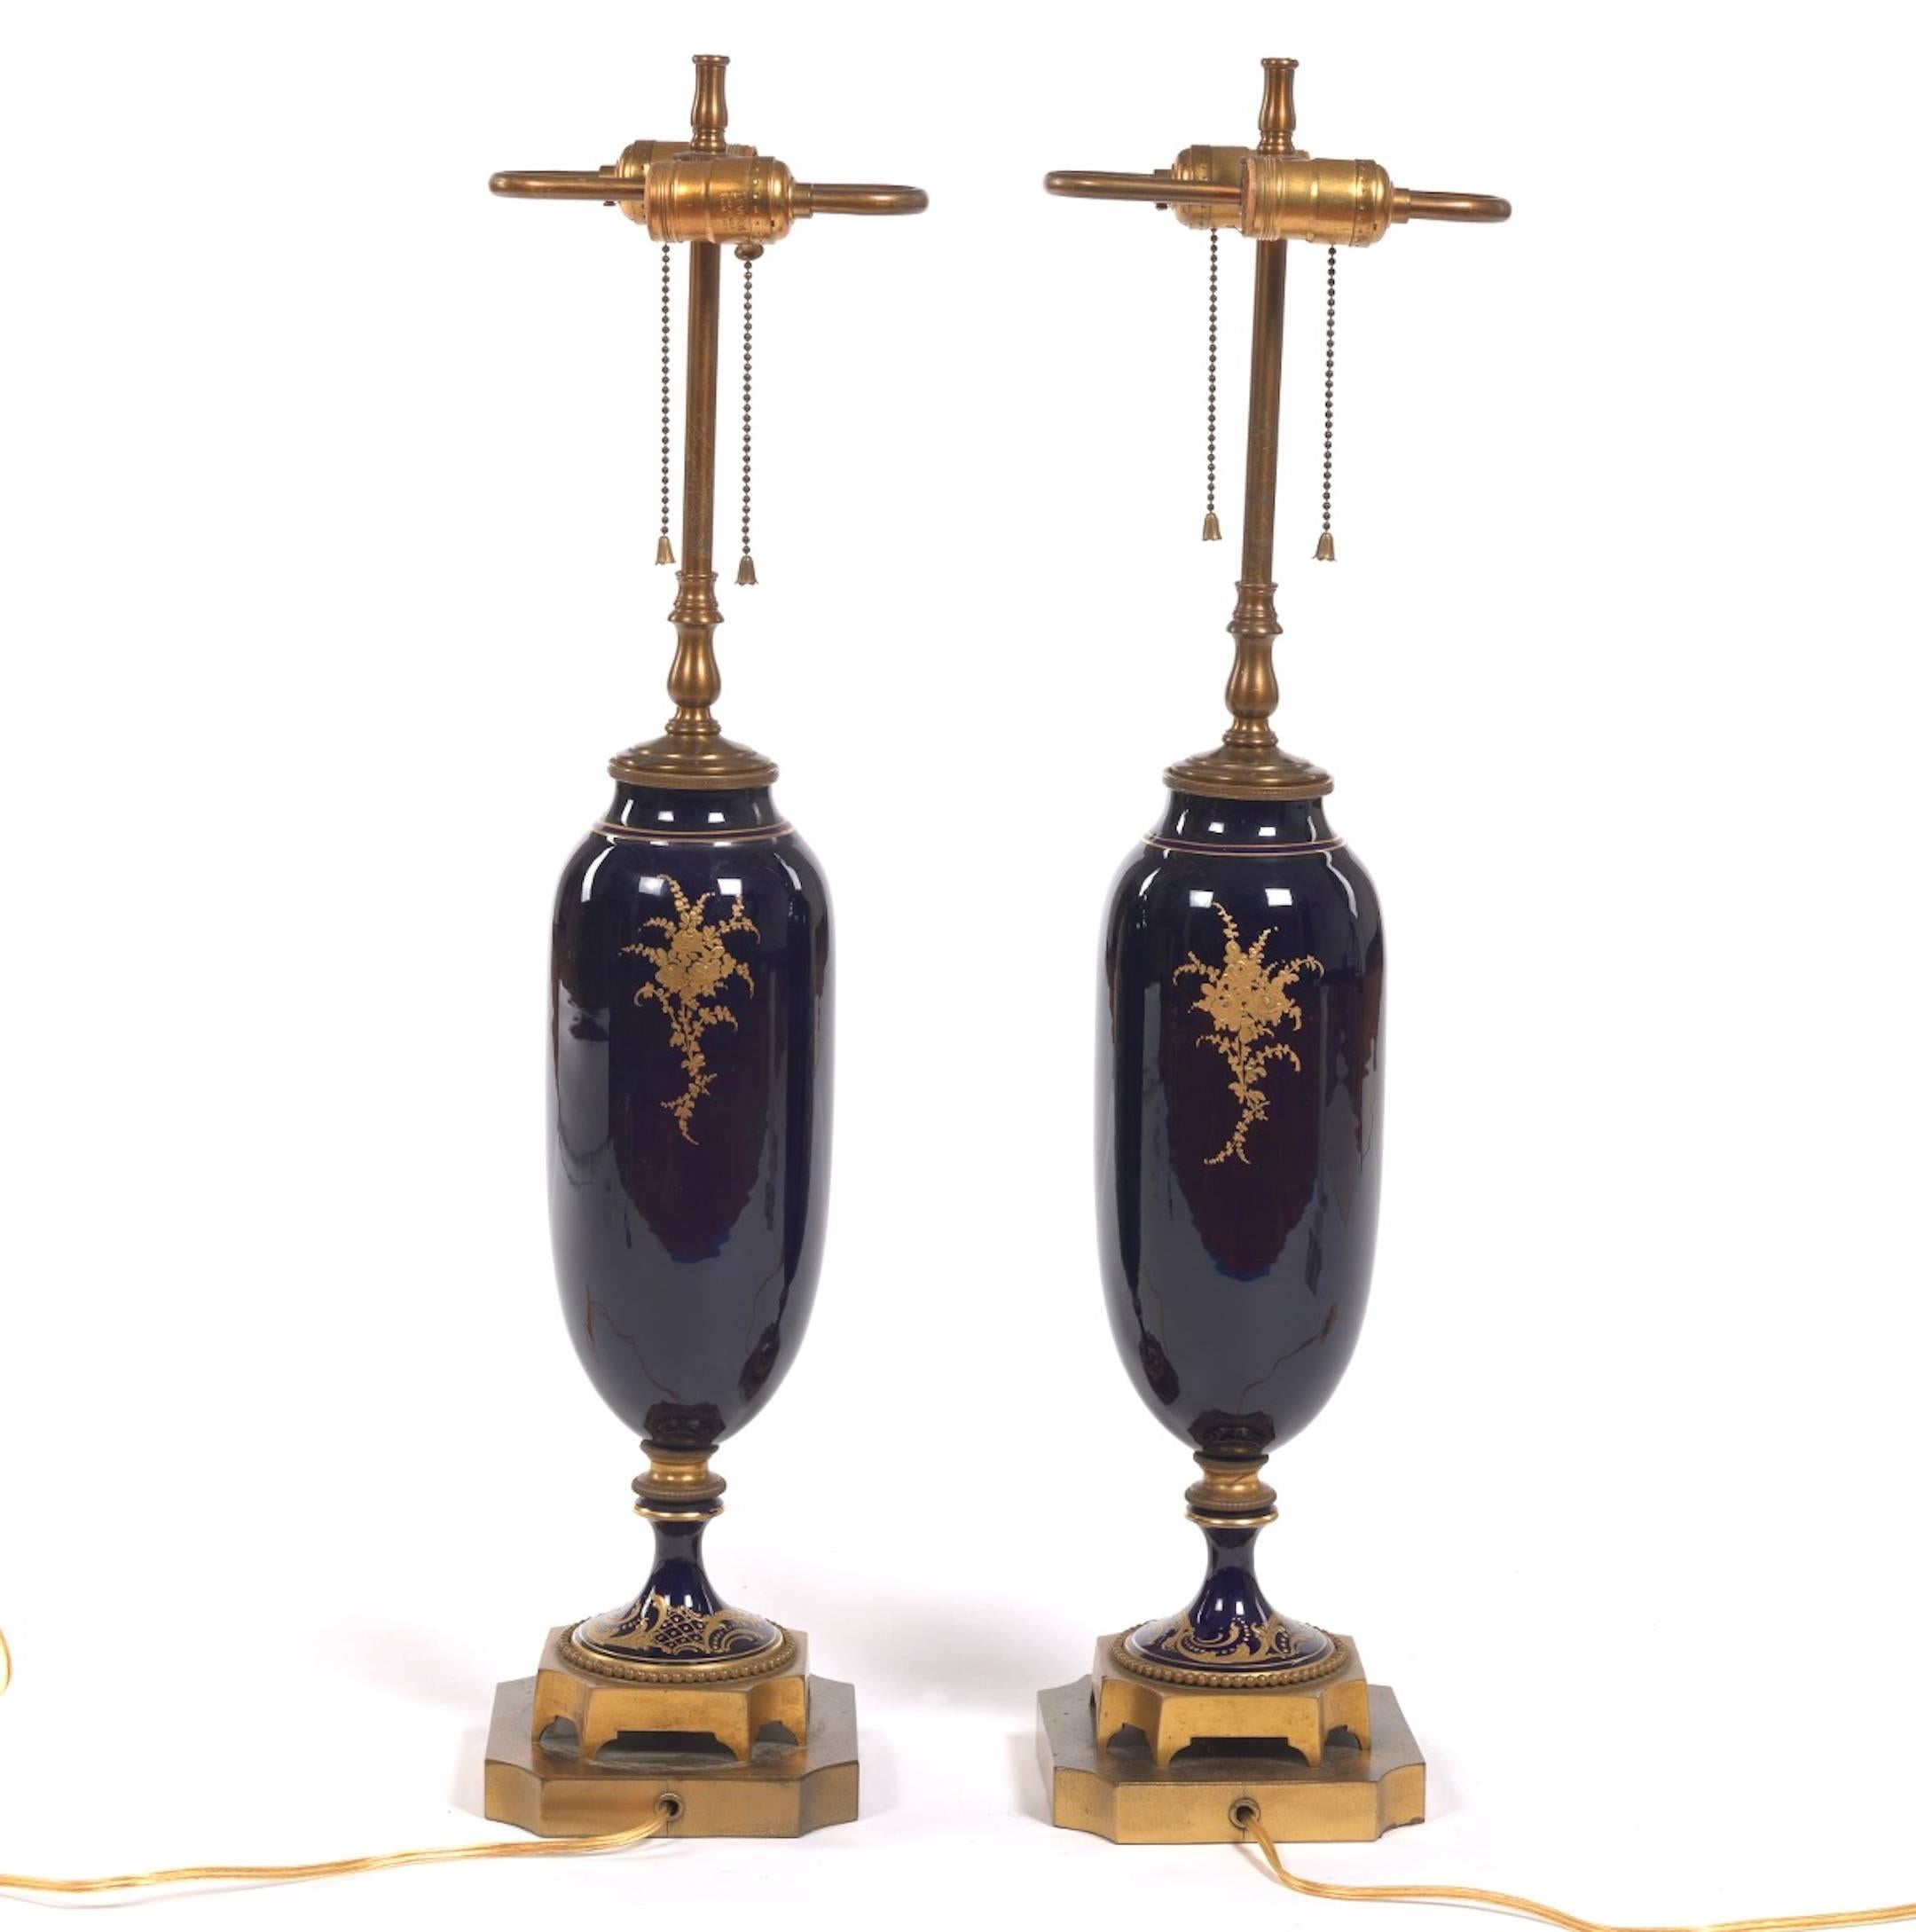 French Pair of Sèvres Style Ormolu-Mounted Urns, Now as Lamps